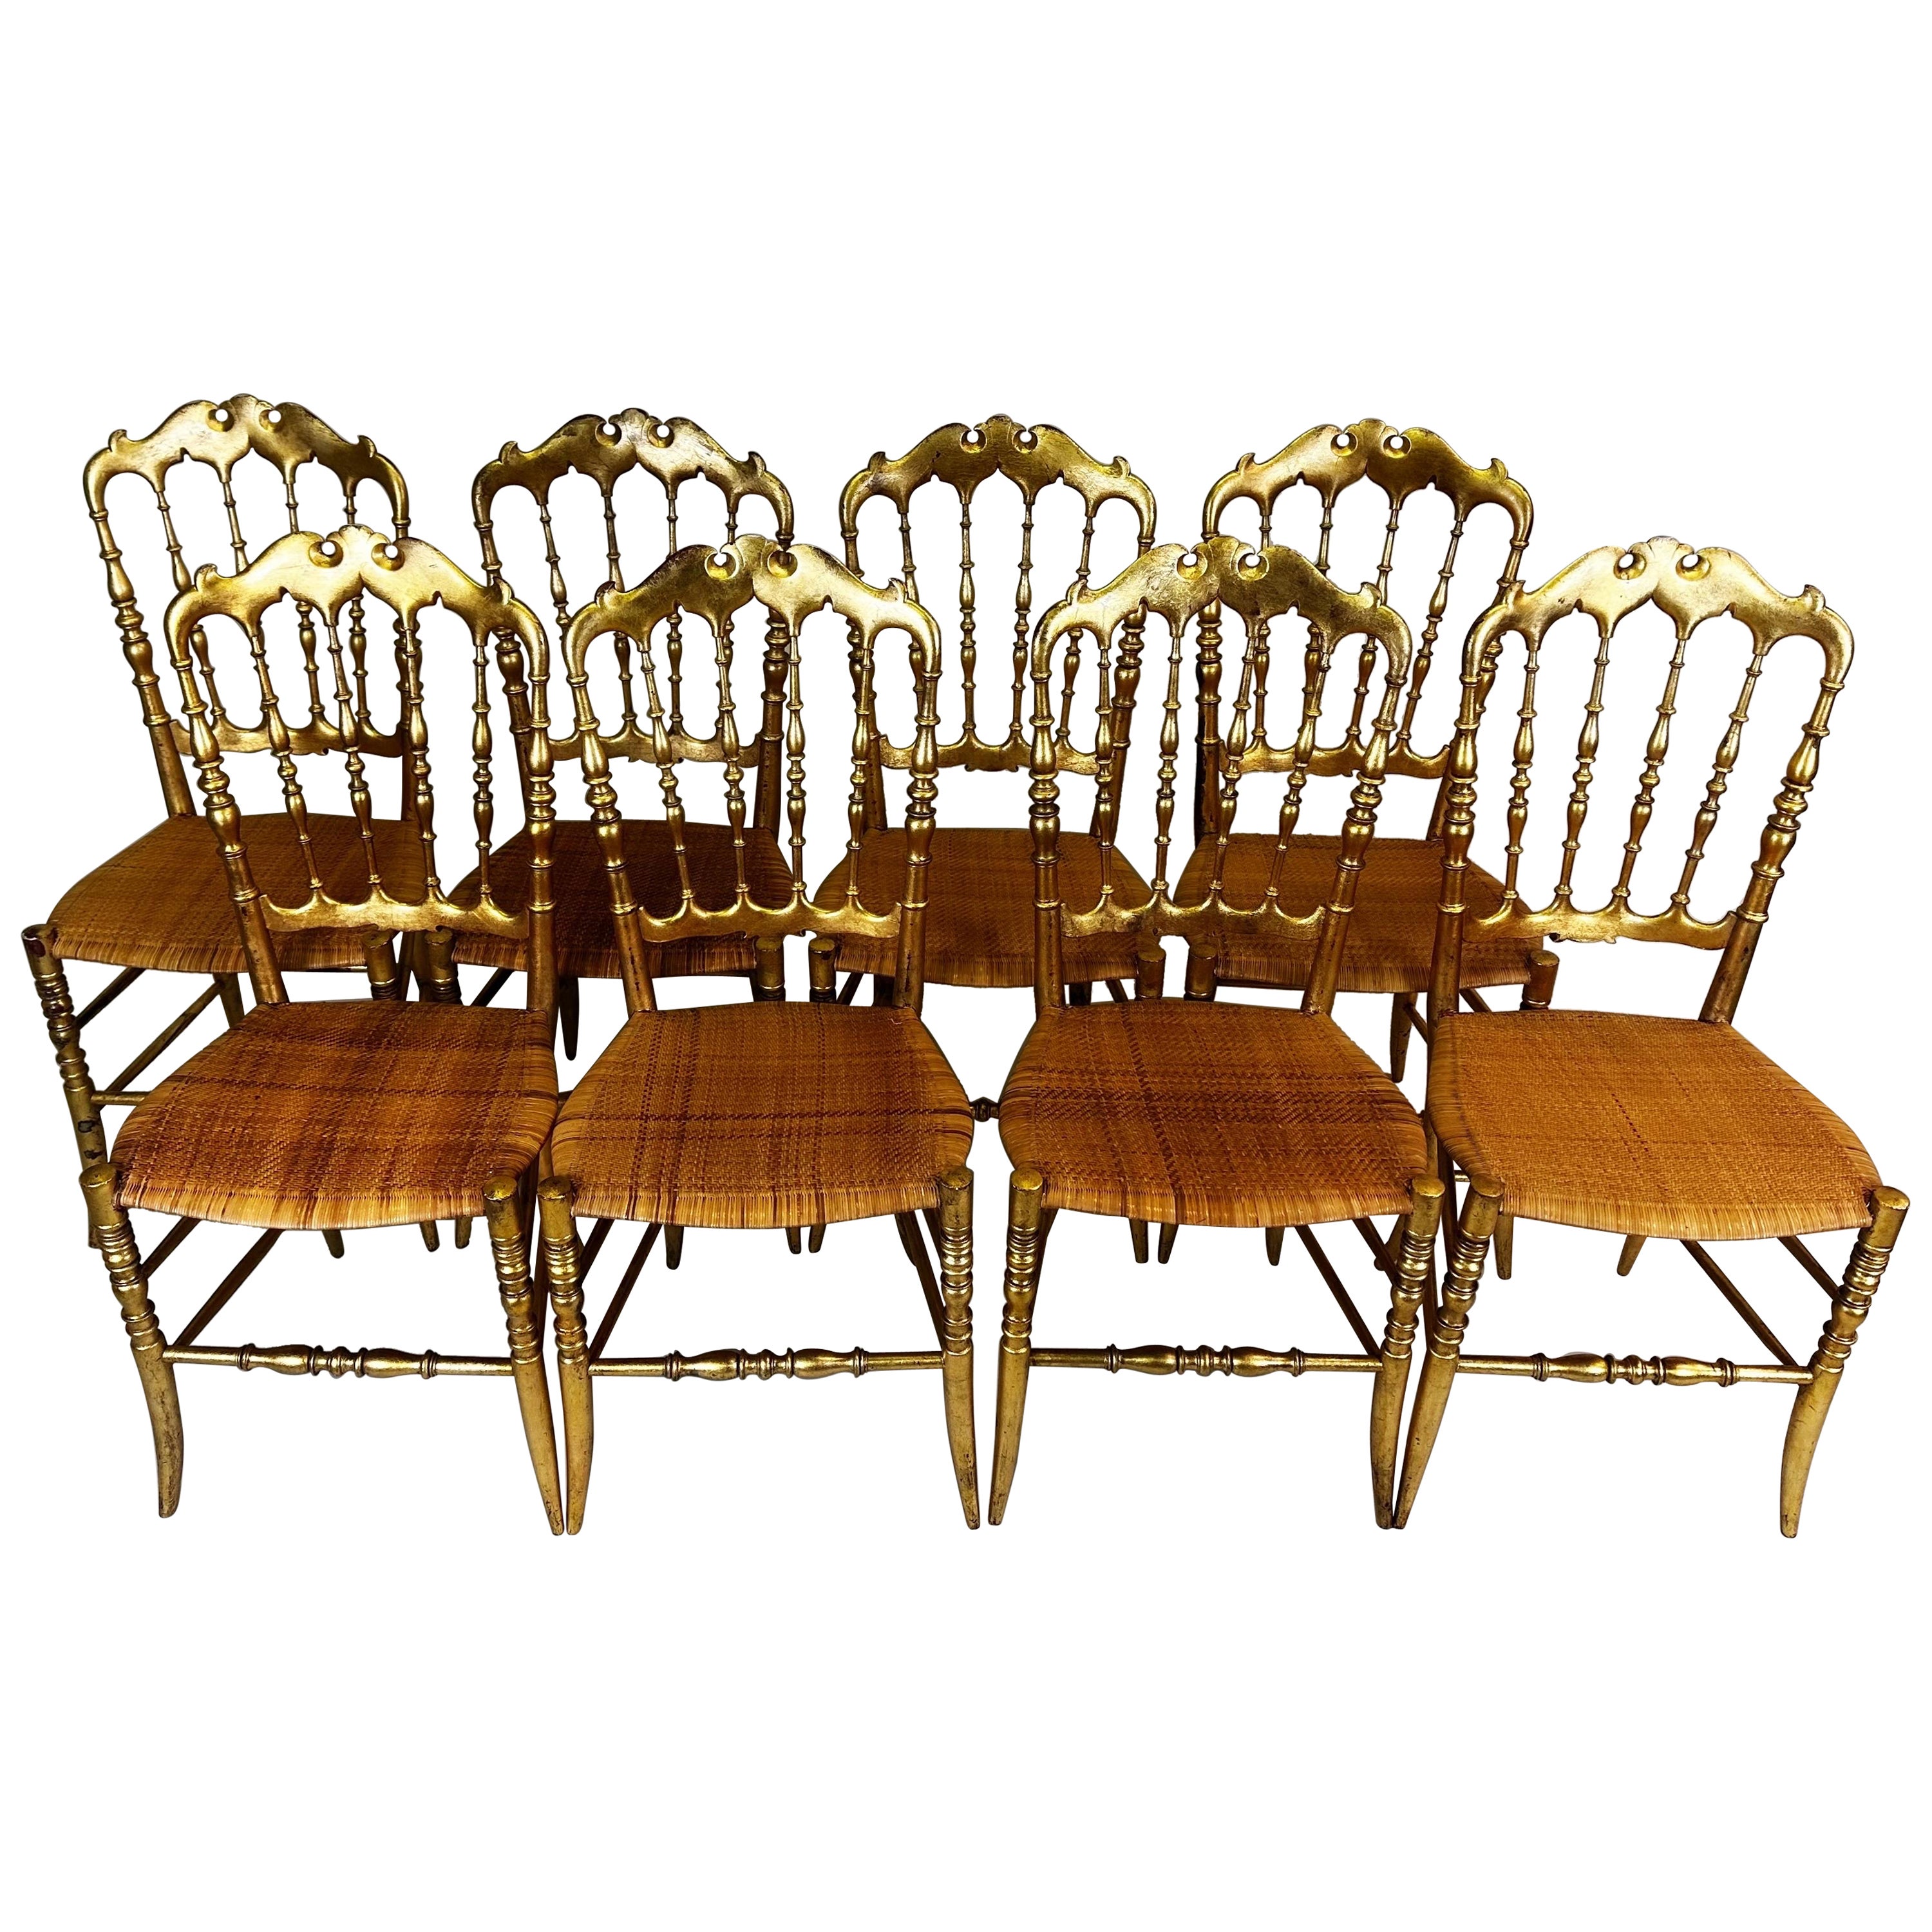 Set of 8 Italian Modern Neoclassical Dining Chairs in Carved Gilt Wood & Rattan For Sale